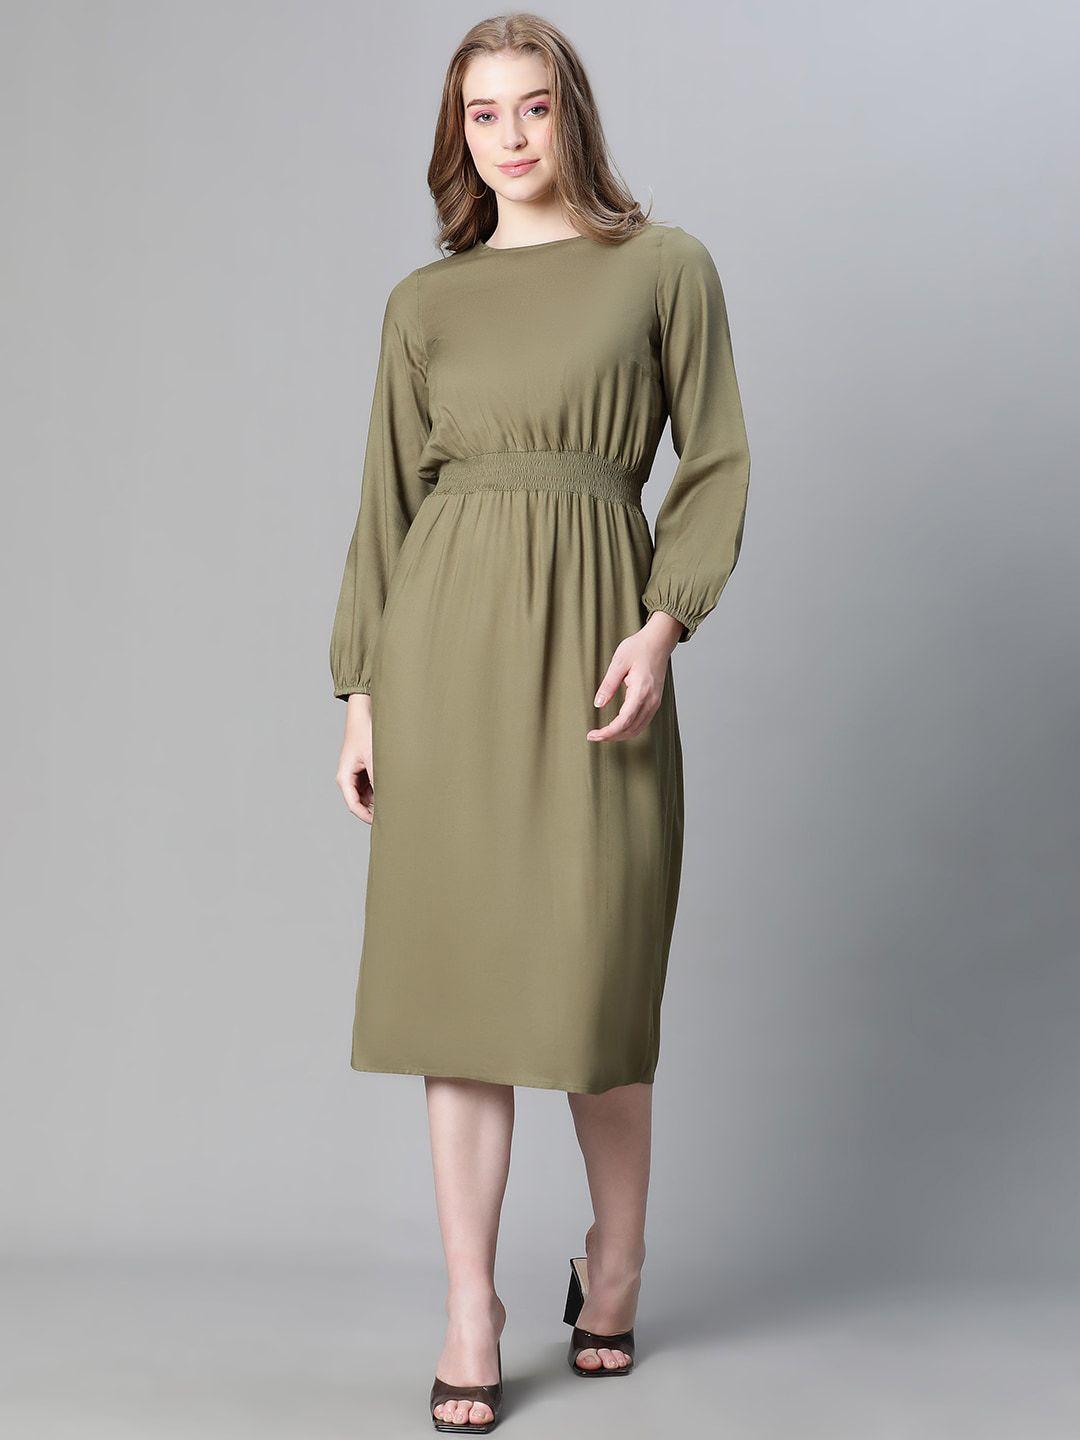 oxolloxo puff sleeves a-line midi dress